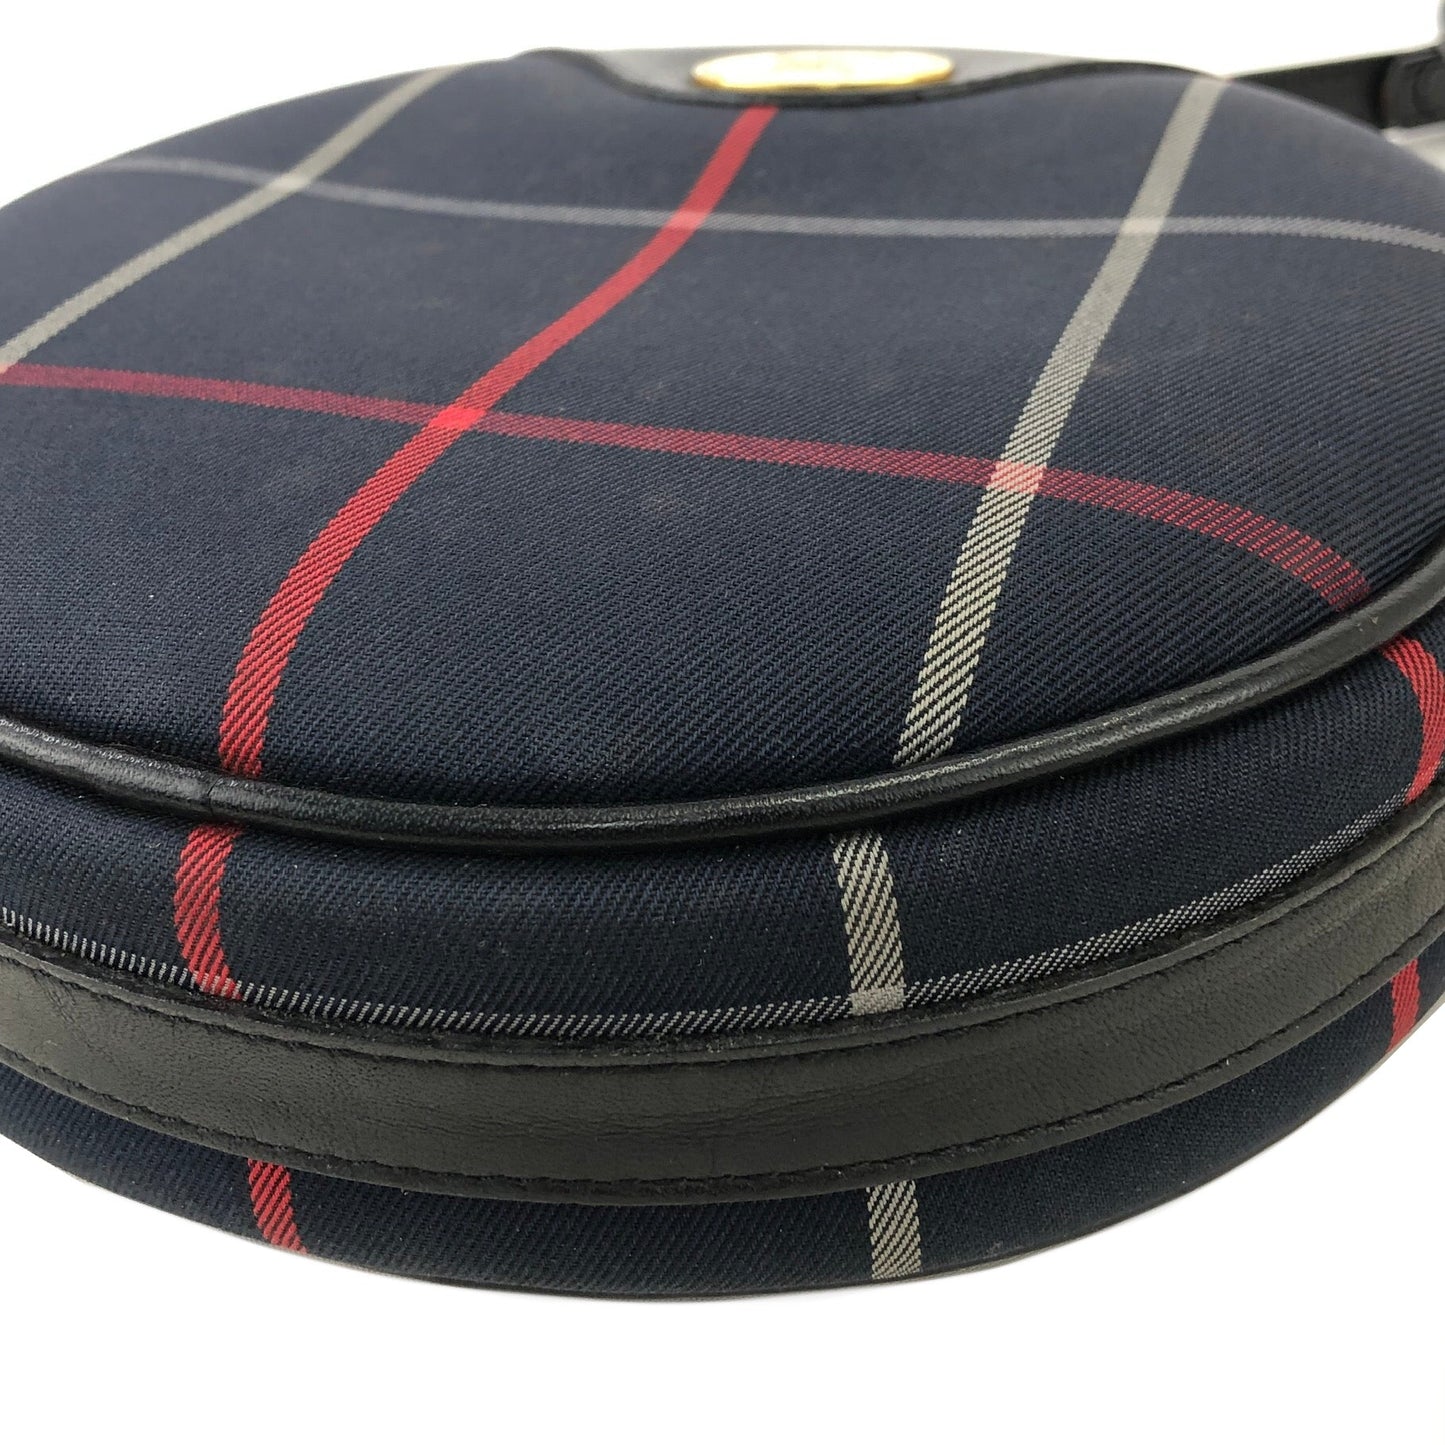 Burberrys Windowpane Check Pattern Round Small Shoulder bag Navy Vintage Old h4xh3h